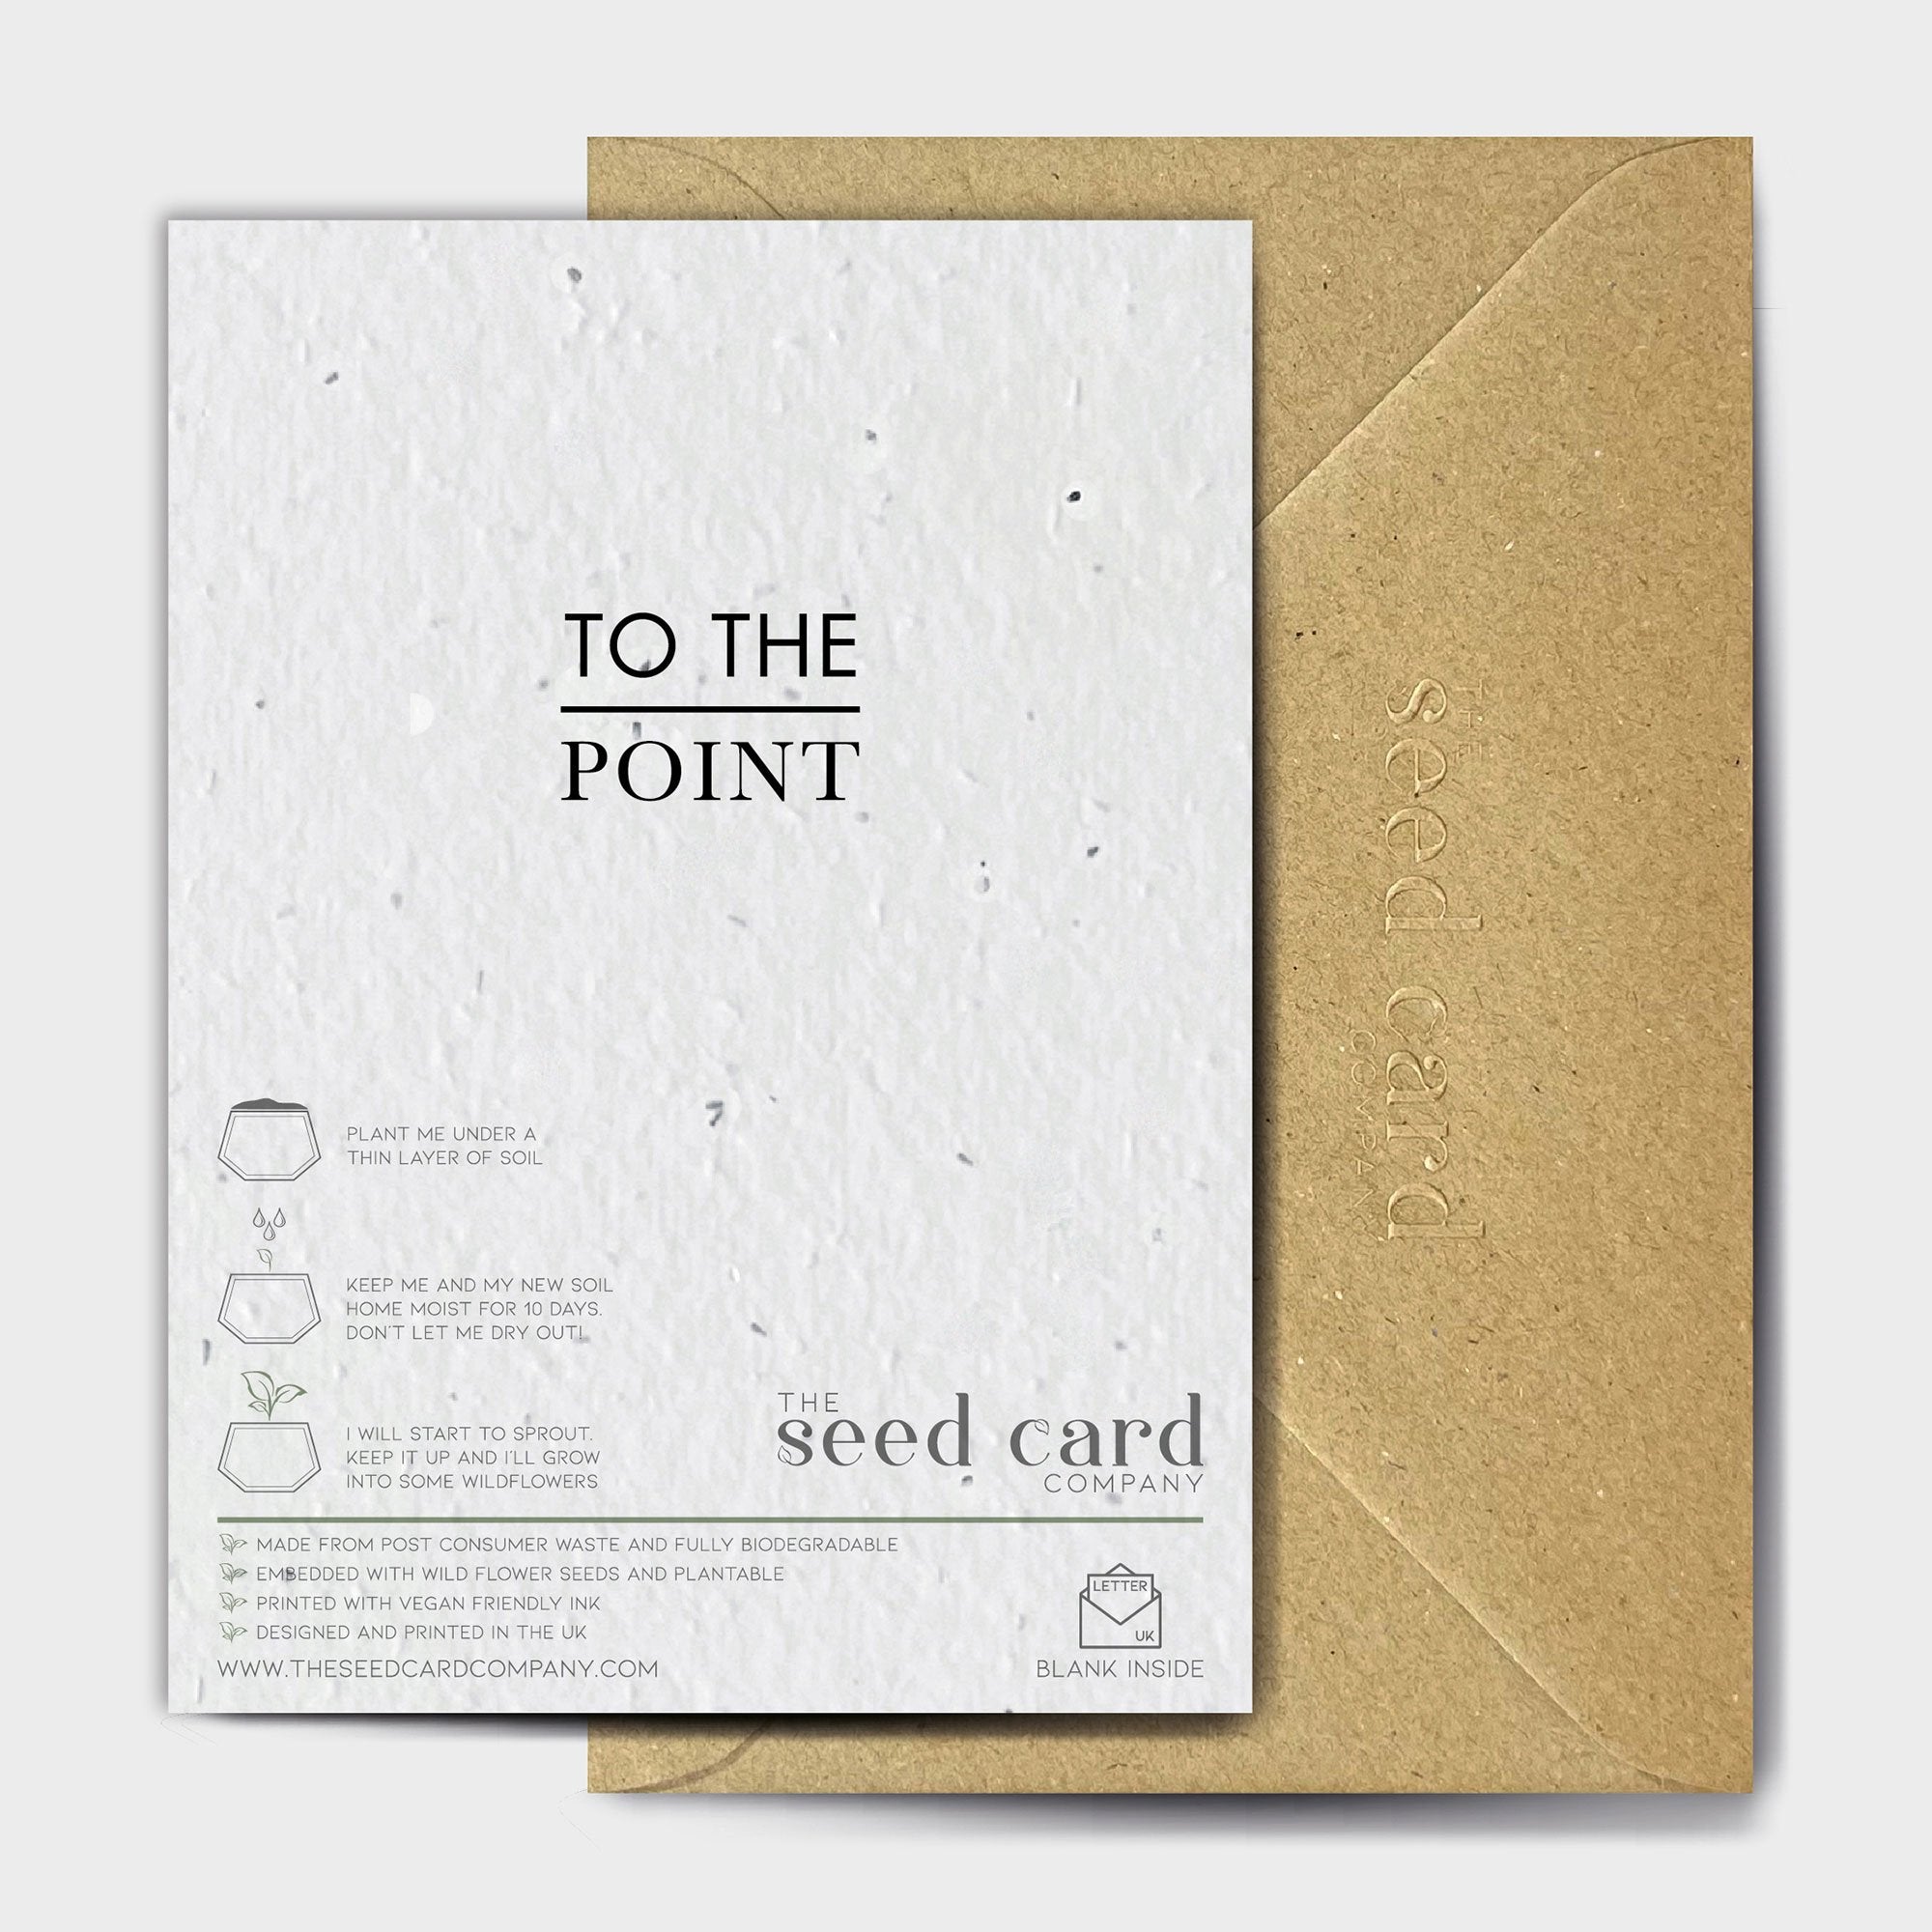 Shop online But With Better Jokes - 100% biodegradable seed-embedded cards Shop -The Seed Card Company